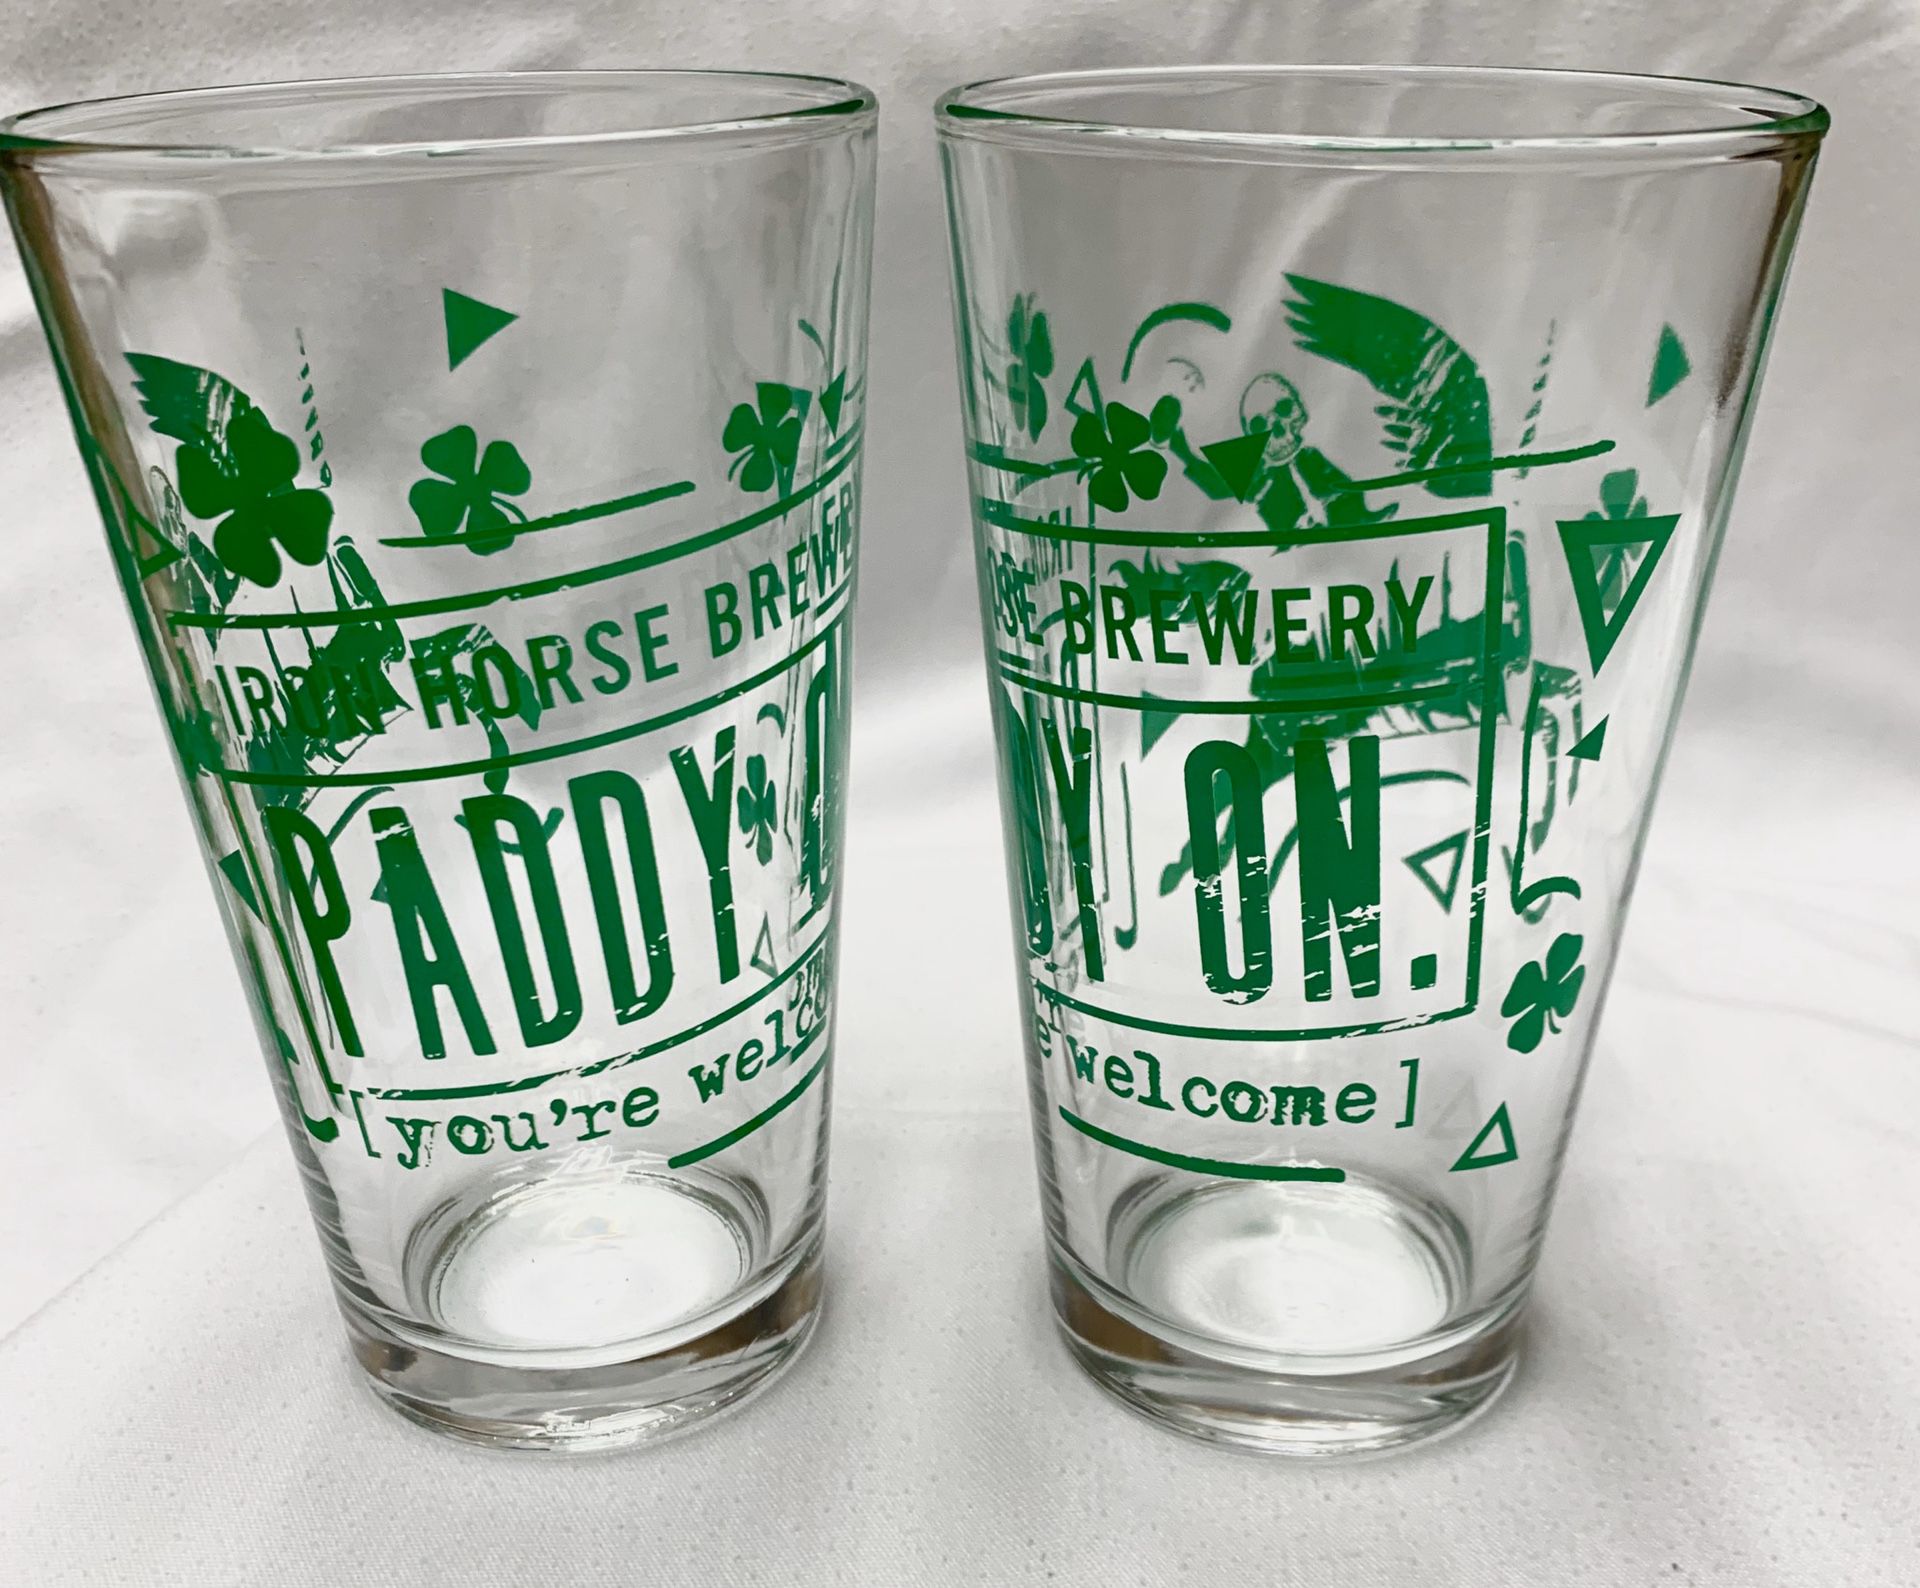 Iron horse Brewery Paddy On glasses